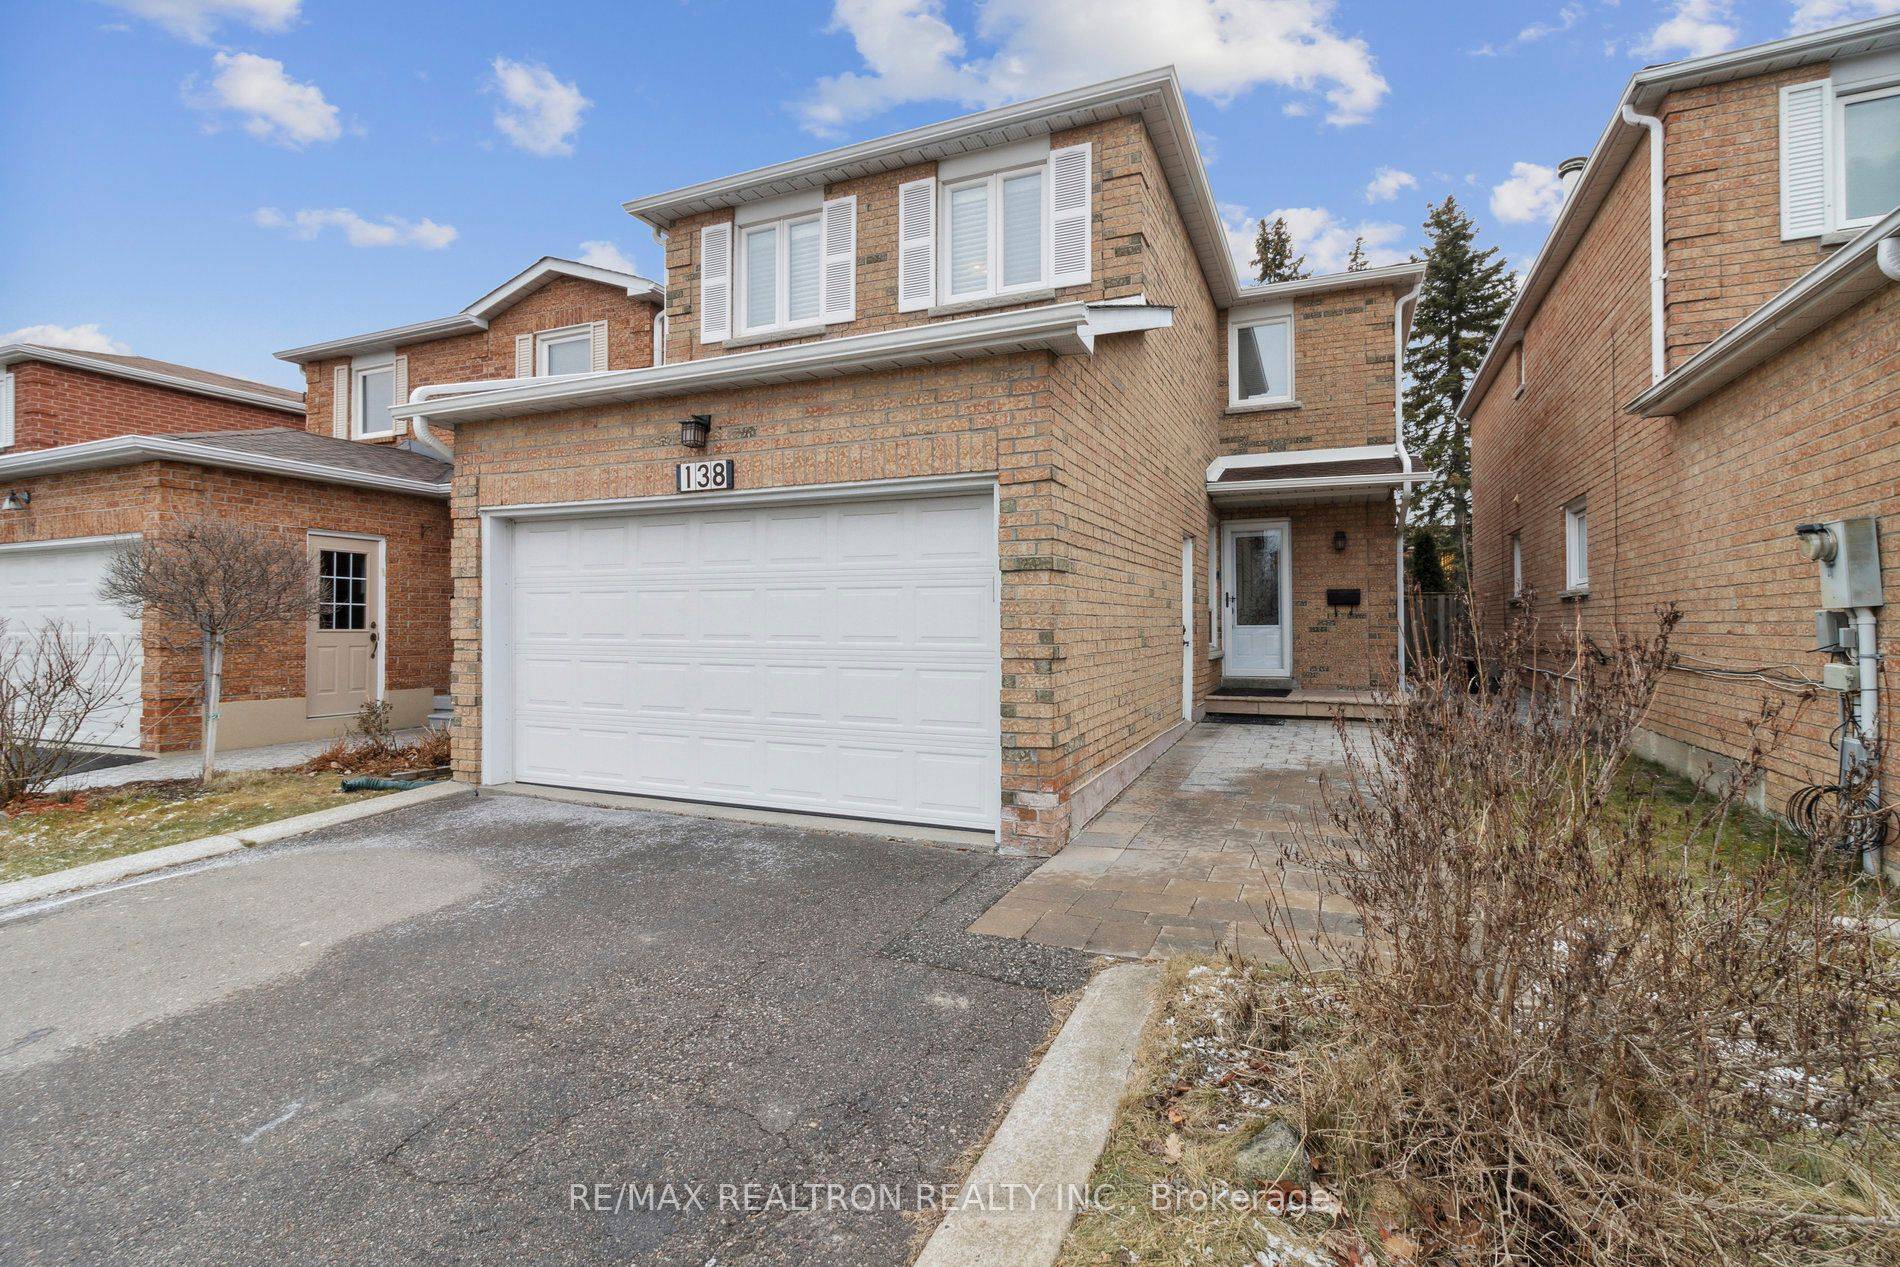 Fantastic Pristine Reno'd 3 Bdrm Great Layout With Updated Chef's Kitchen, Hardwood Floors Main, Main Flr Fam Rm w Fireplace, Lrg Principle Rms, Lrg Bsmt Rec Rm and 4th Bdrm, ...